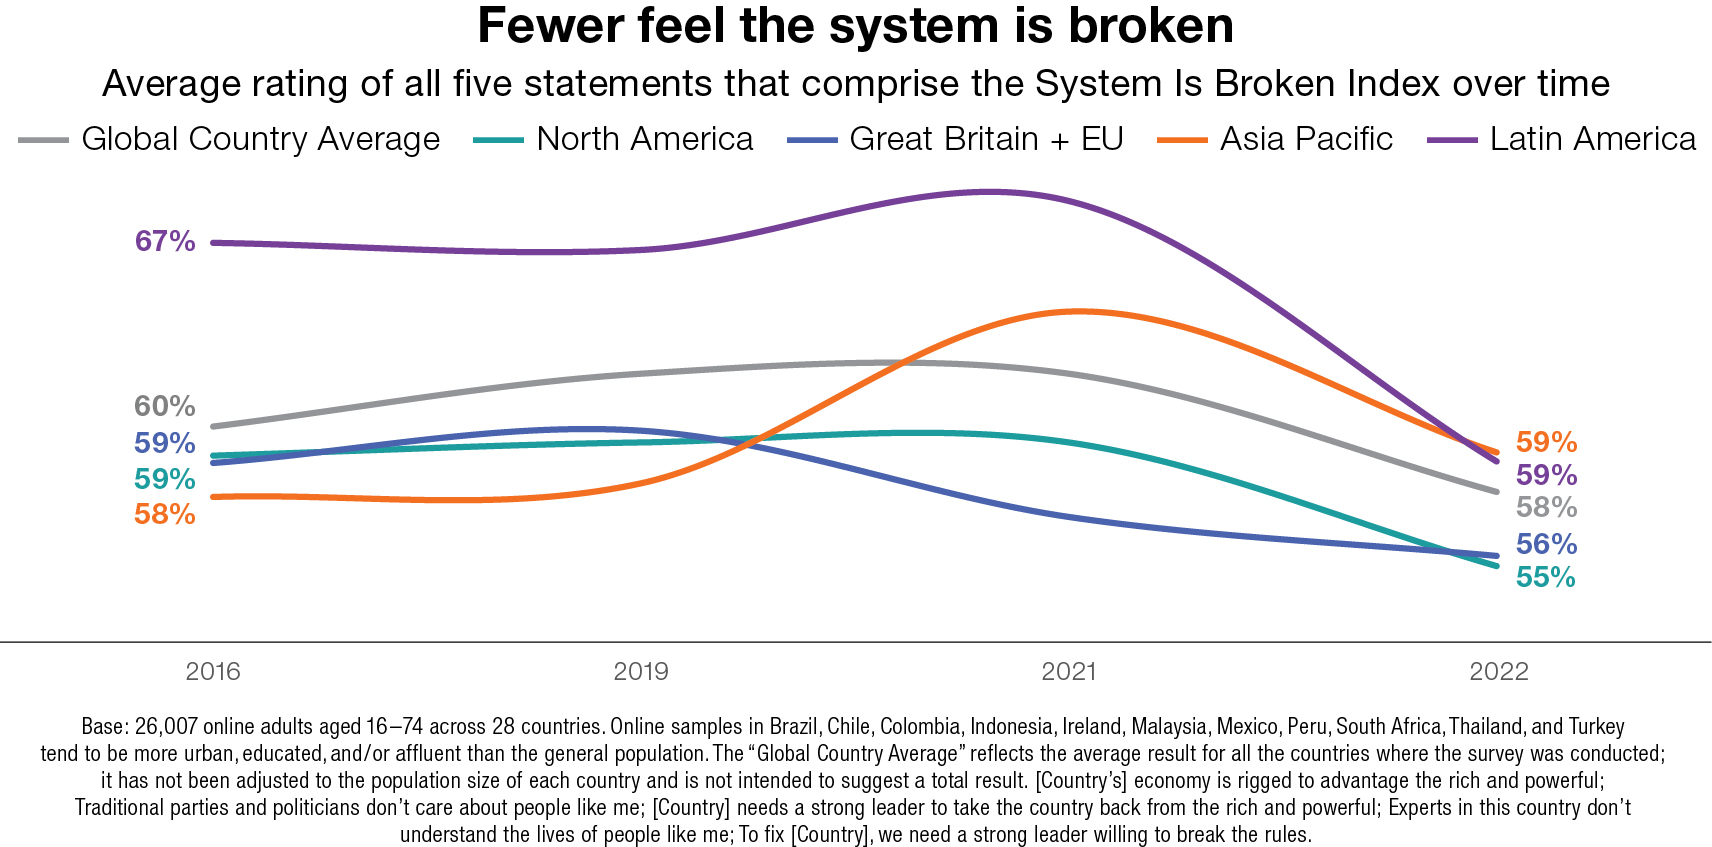 Fewer feel the system is broken in 2022 compared to previous years